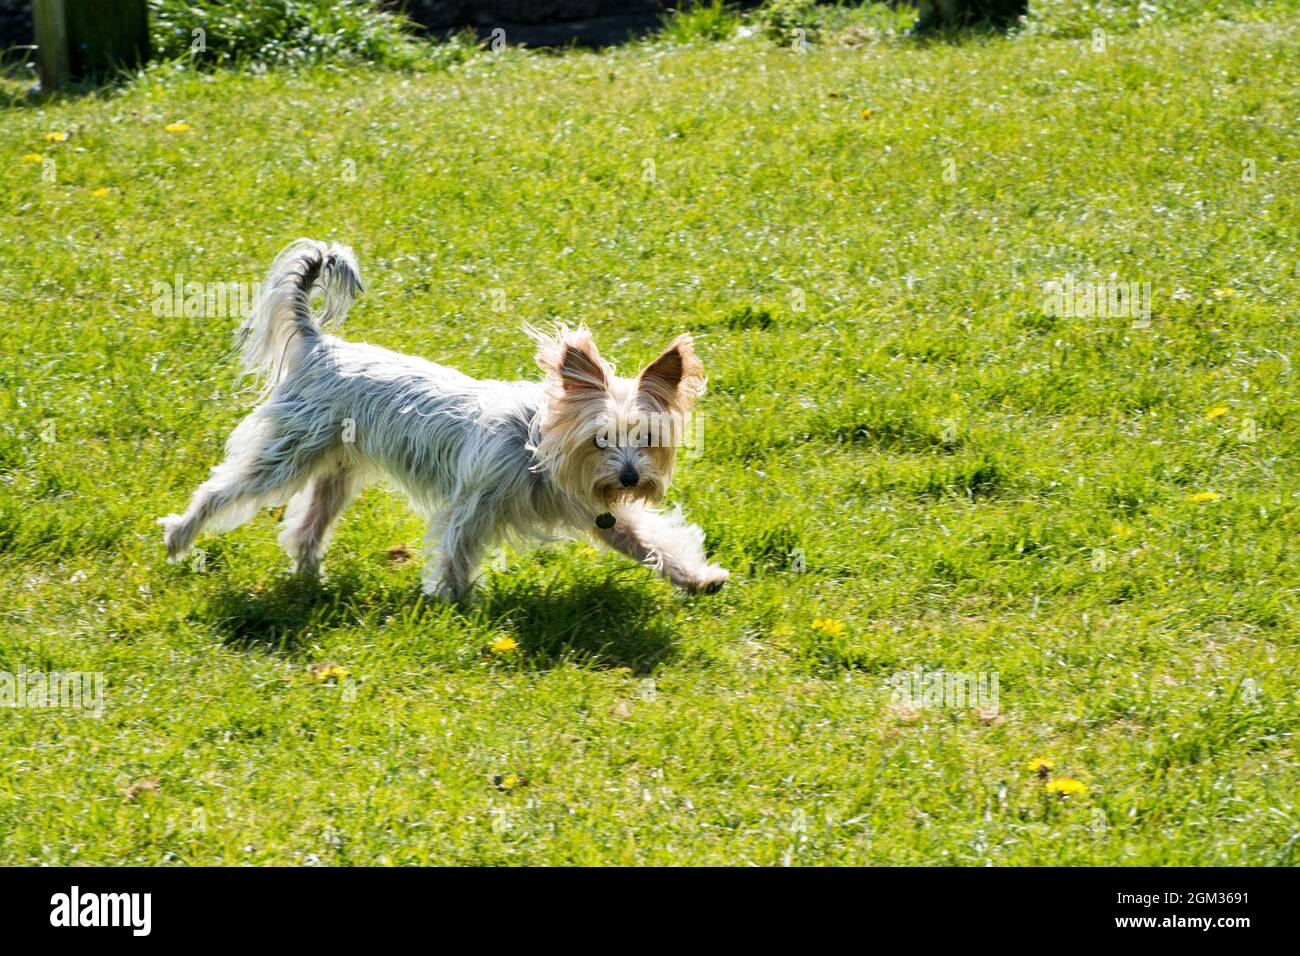 Yorkshire Terrier dog running in a field Stock Photo